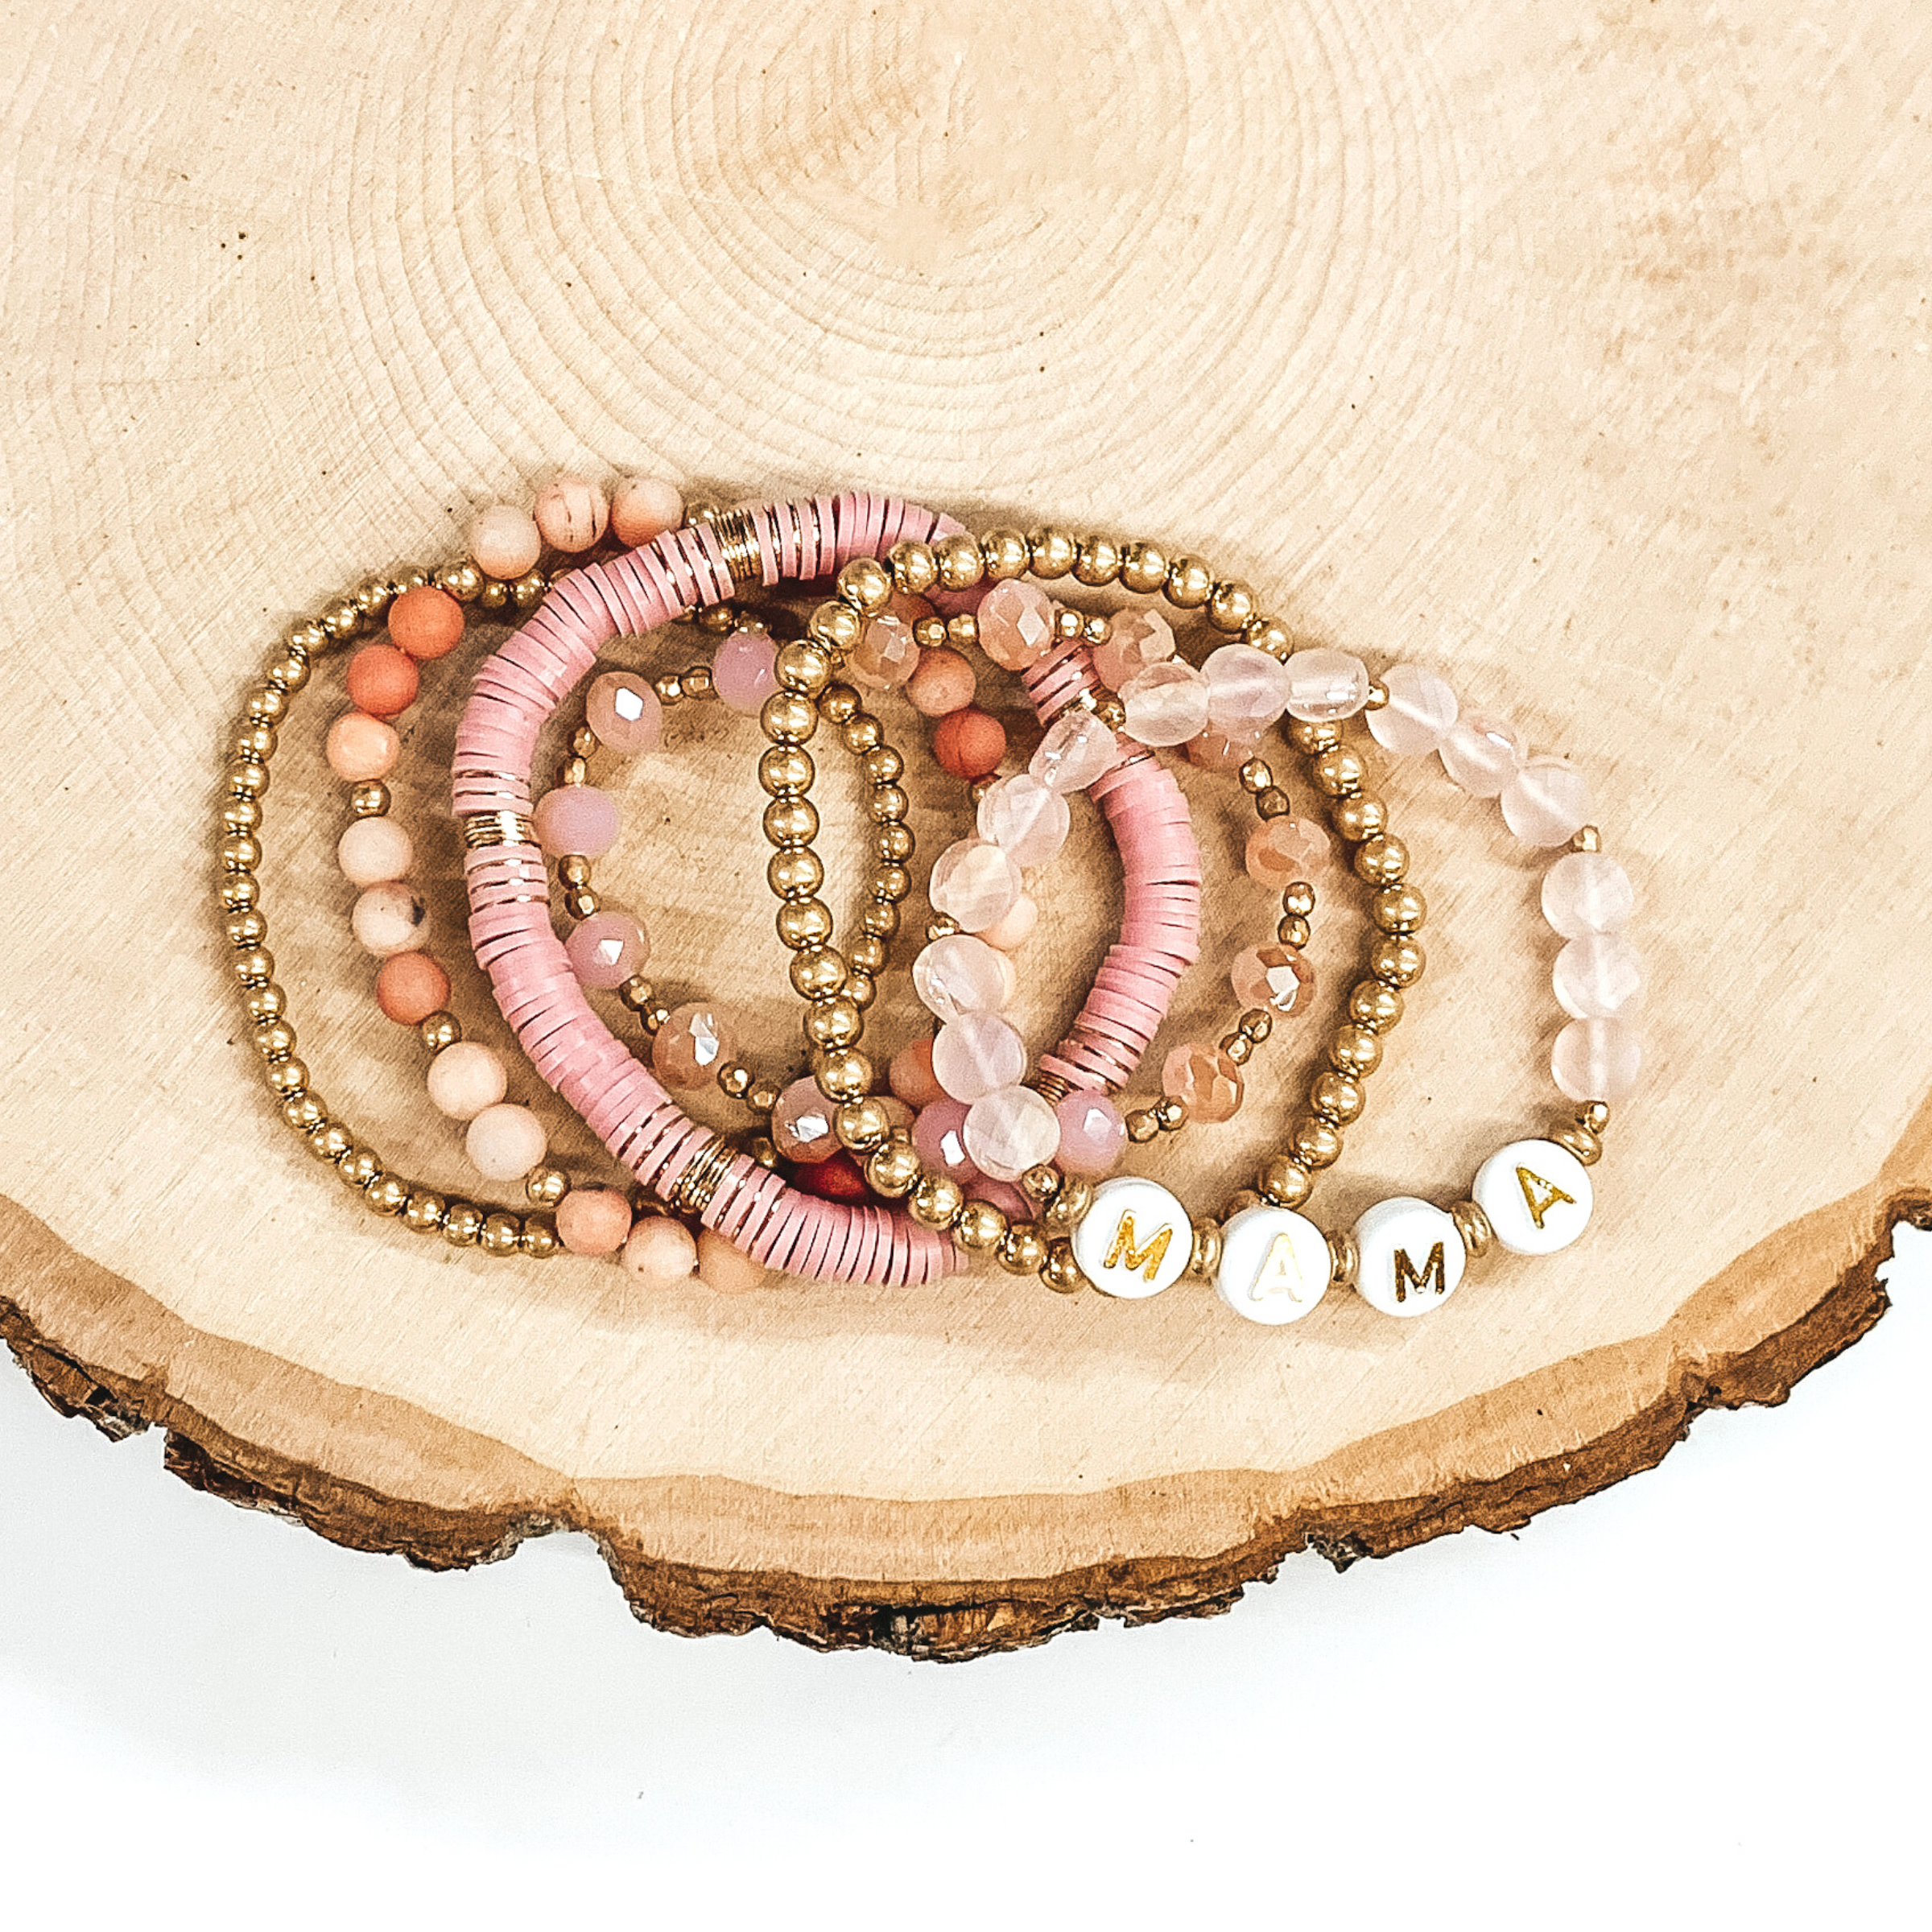 This bracelet set has a mix of light pink disk beaded bracelet, light pink circle beaded bracelet, two gold beaded bracelets, a light pink crystal beaded bracelet. One of the crystal beaded bracelets has letter beads that spell out "MAMA." These bracelets are pictured on a piece of wood on a white background.